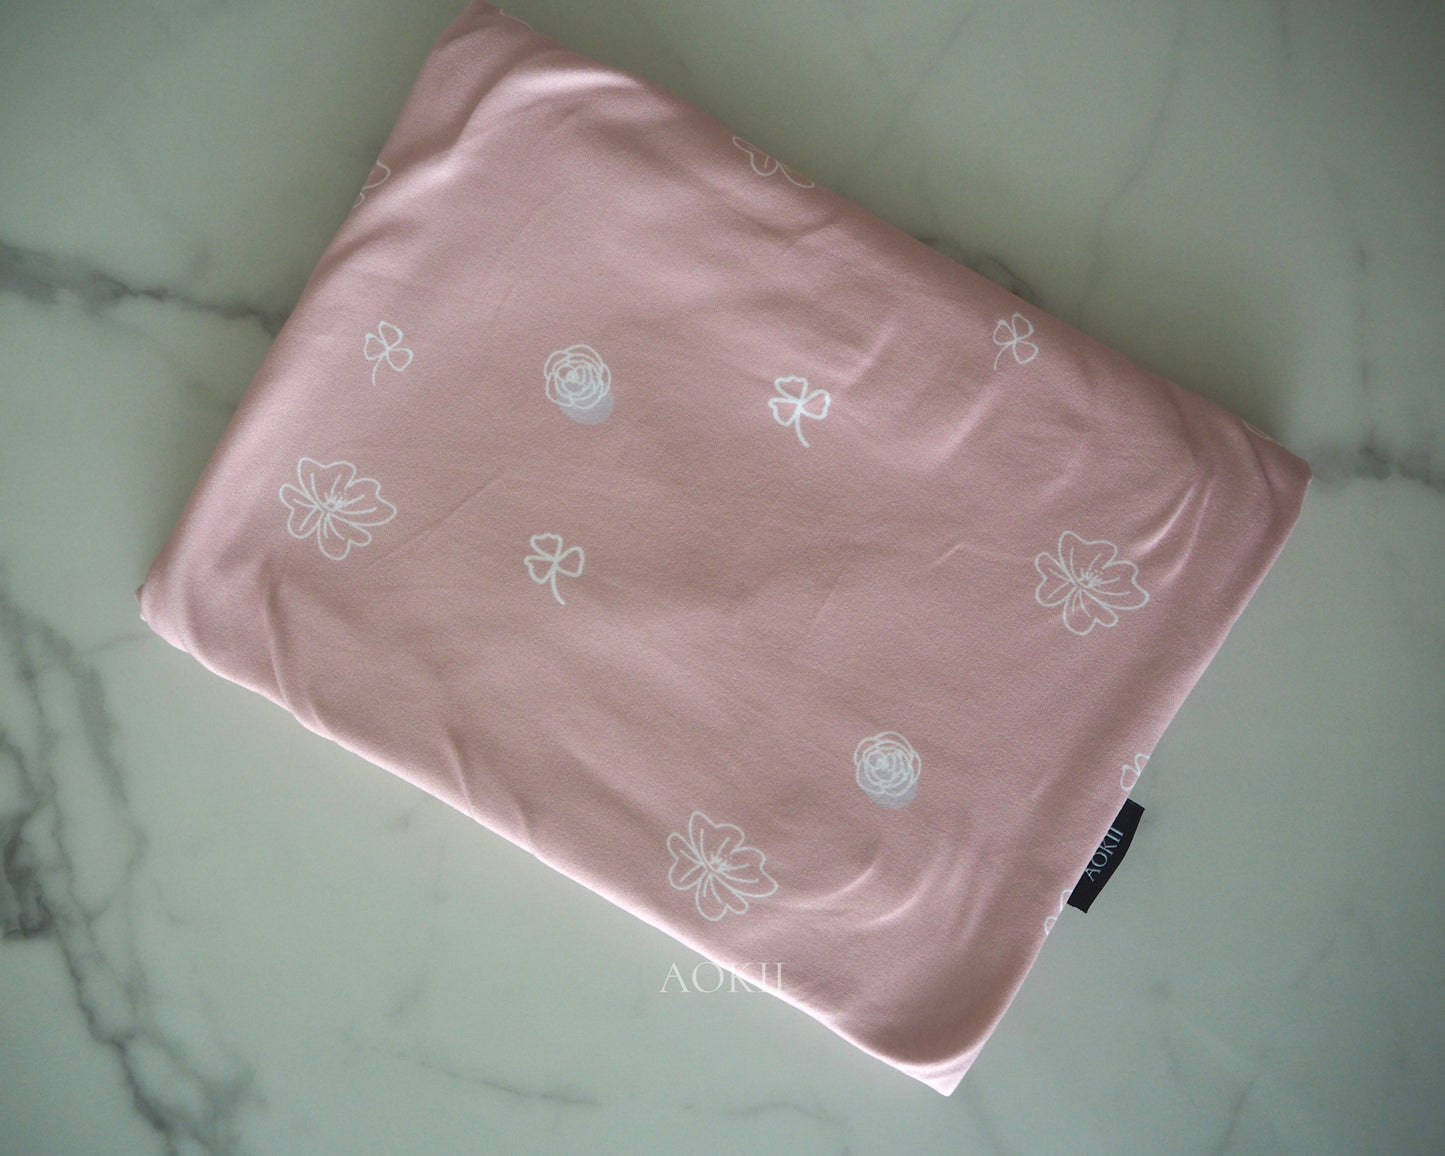 Organic soft nursing cover for breastfeeding and baby shower gifts